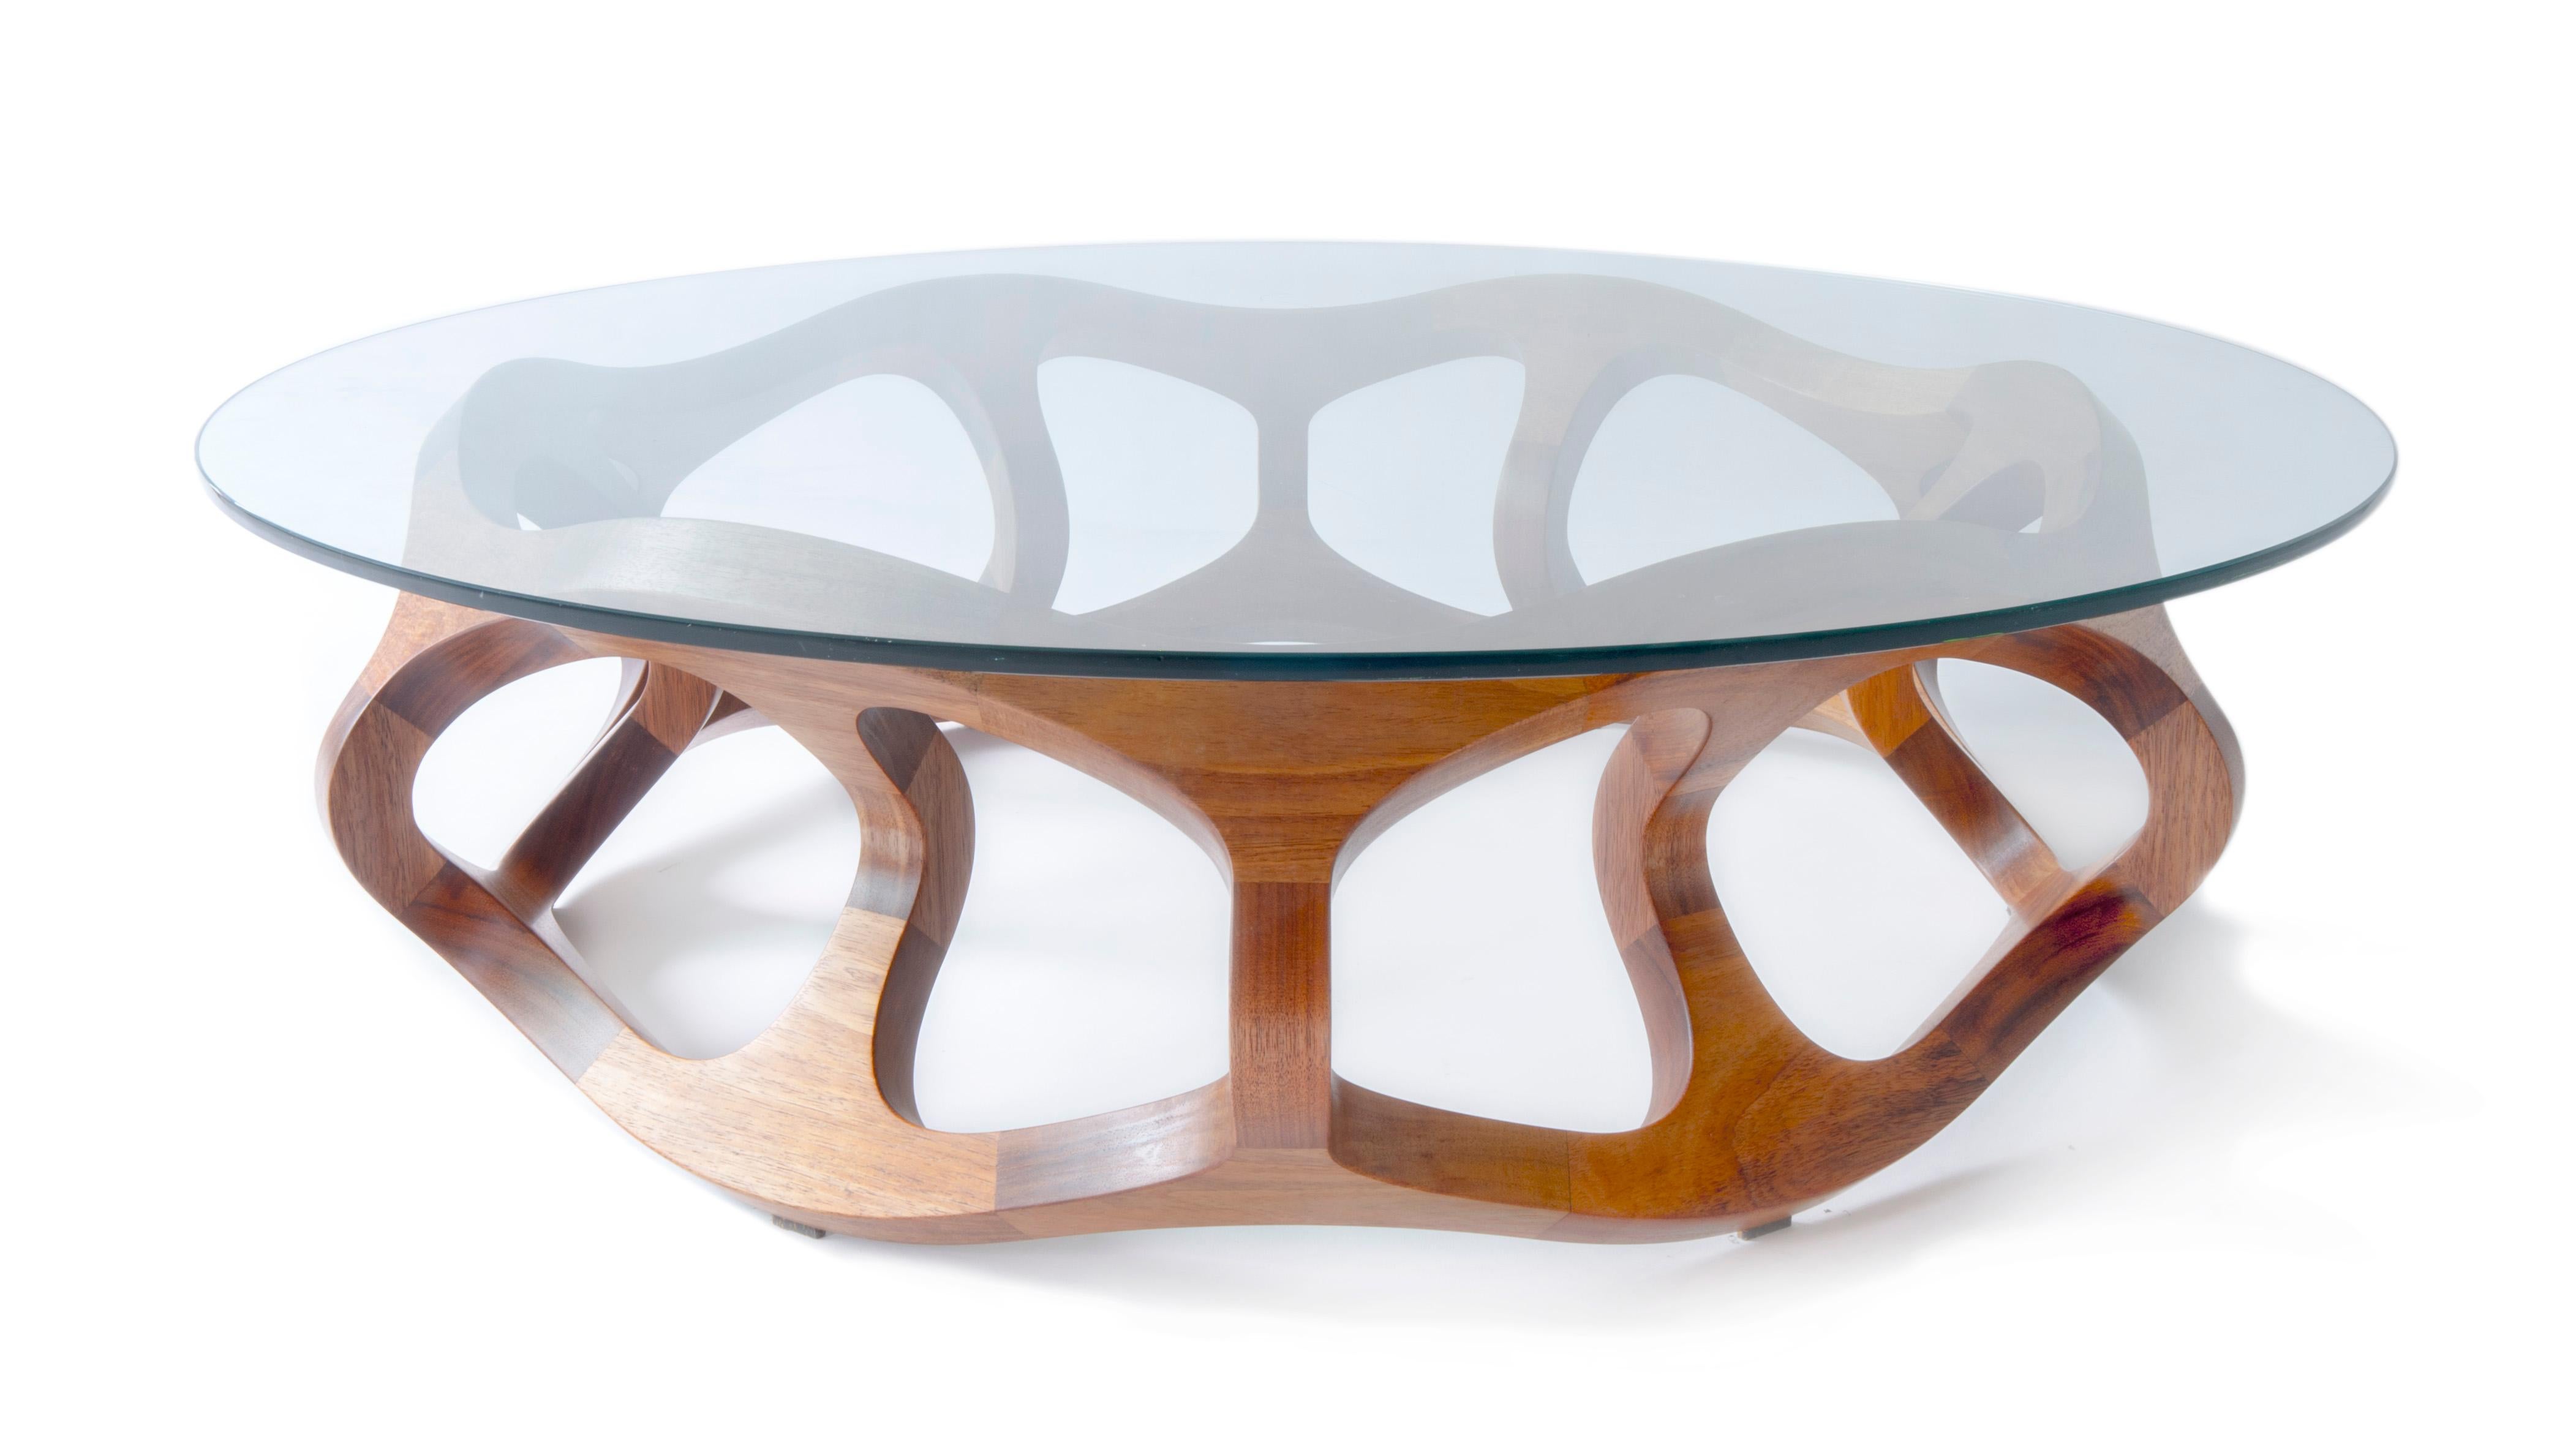 Toro G6, Geometric Sculptural Center Table Made of Solid Wood by Pedro Cerisola For Sale 6